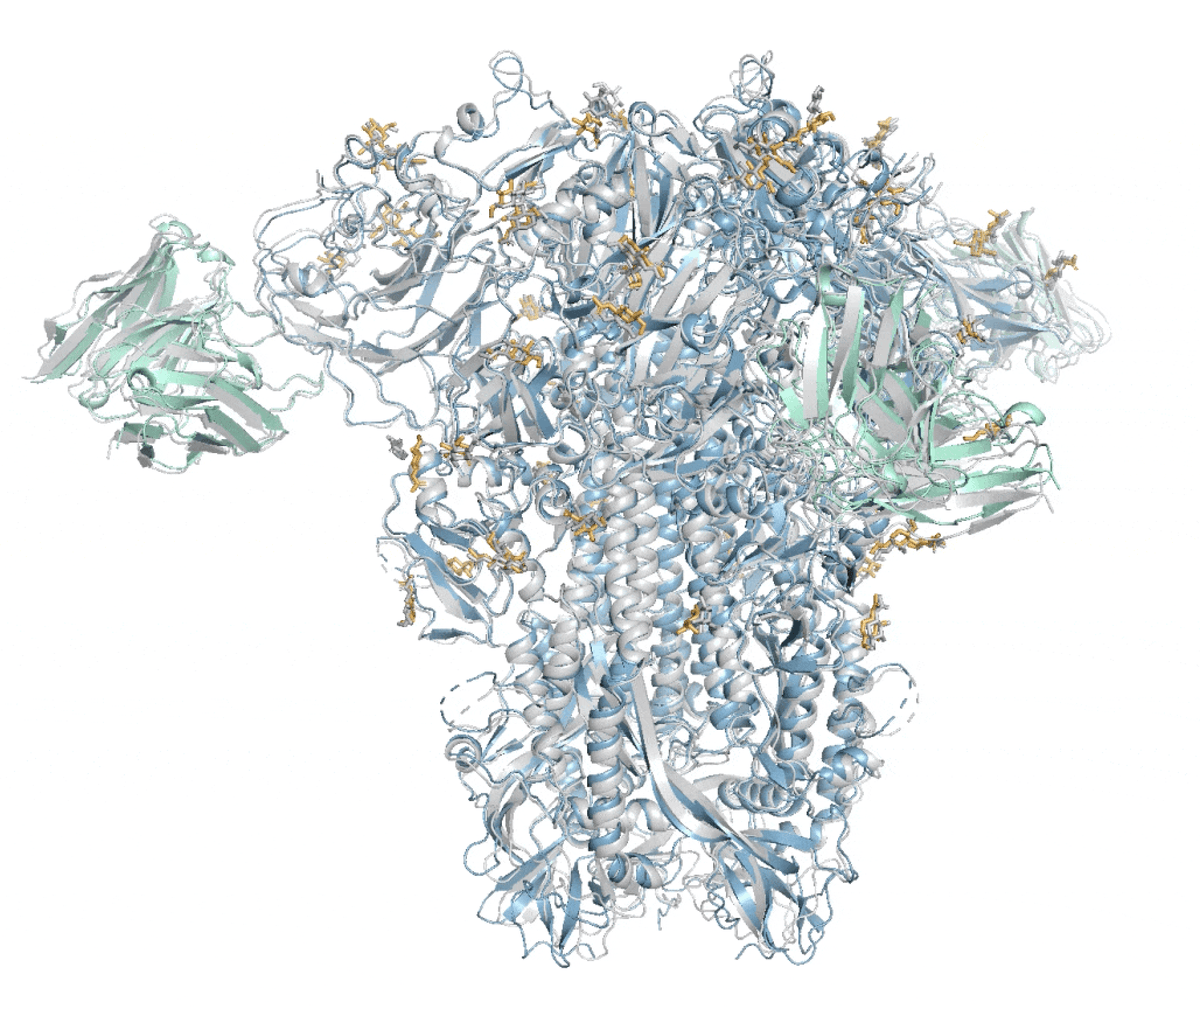 AlphaFold 2 was the most significant advance for #AI in life science (predicting structure of proteins) to date. Today @nature there's AlphaFold 3 for DNA, RNA, small molecules, ions, and their interactions (spike of coronavirus below) nature.com/articles/s4158…